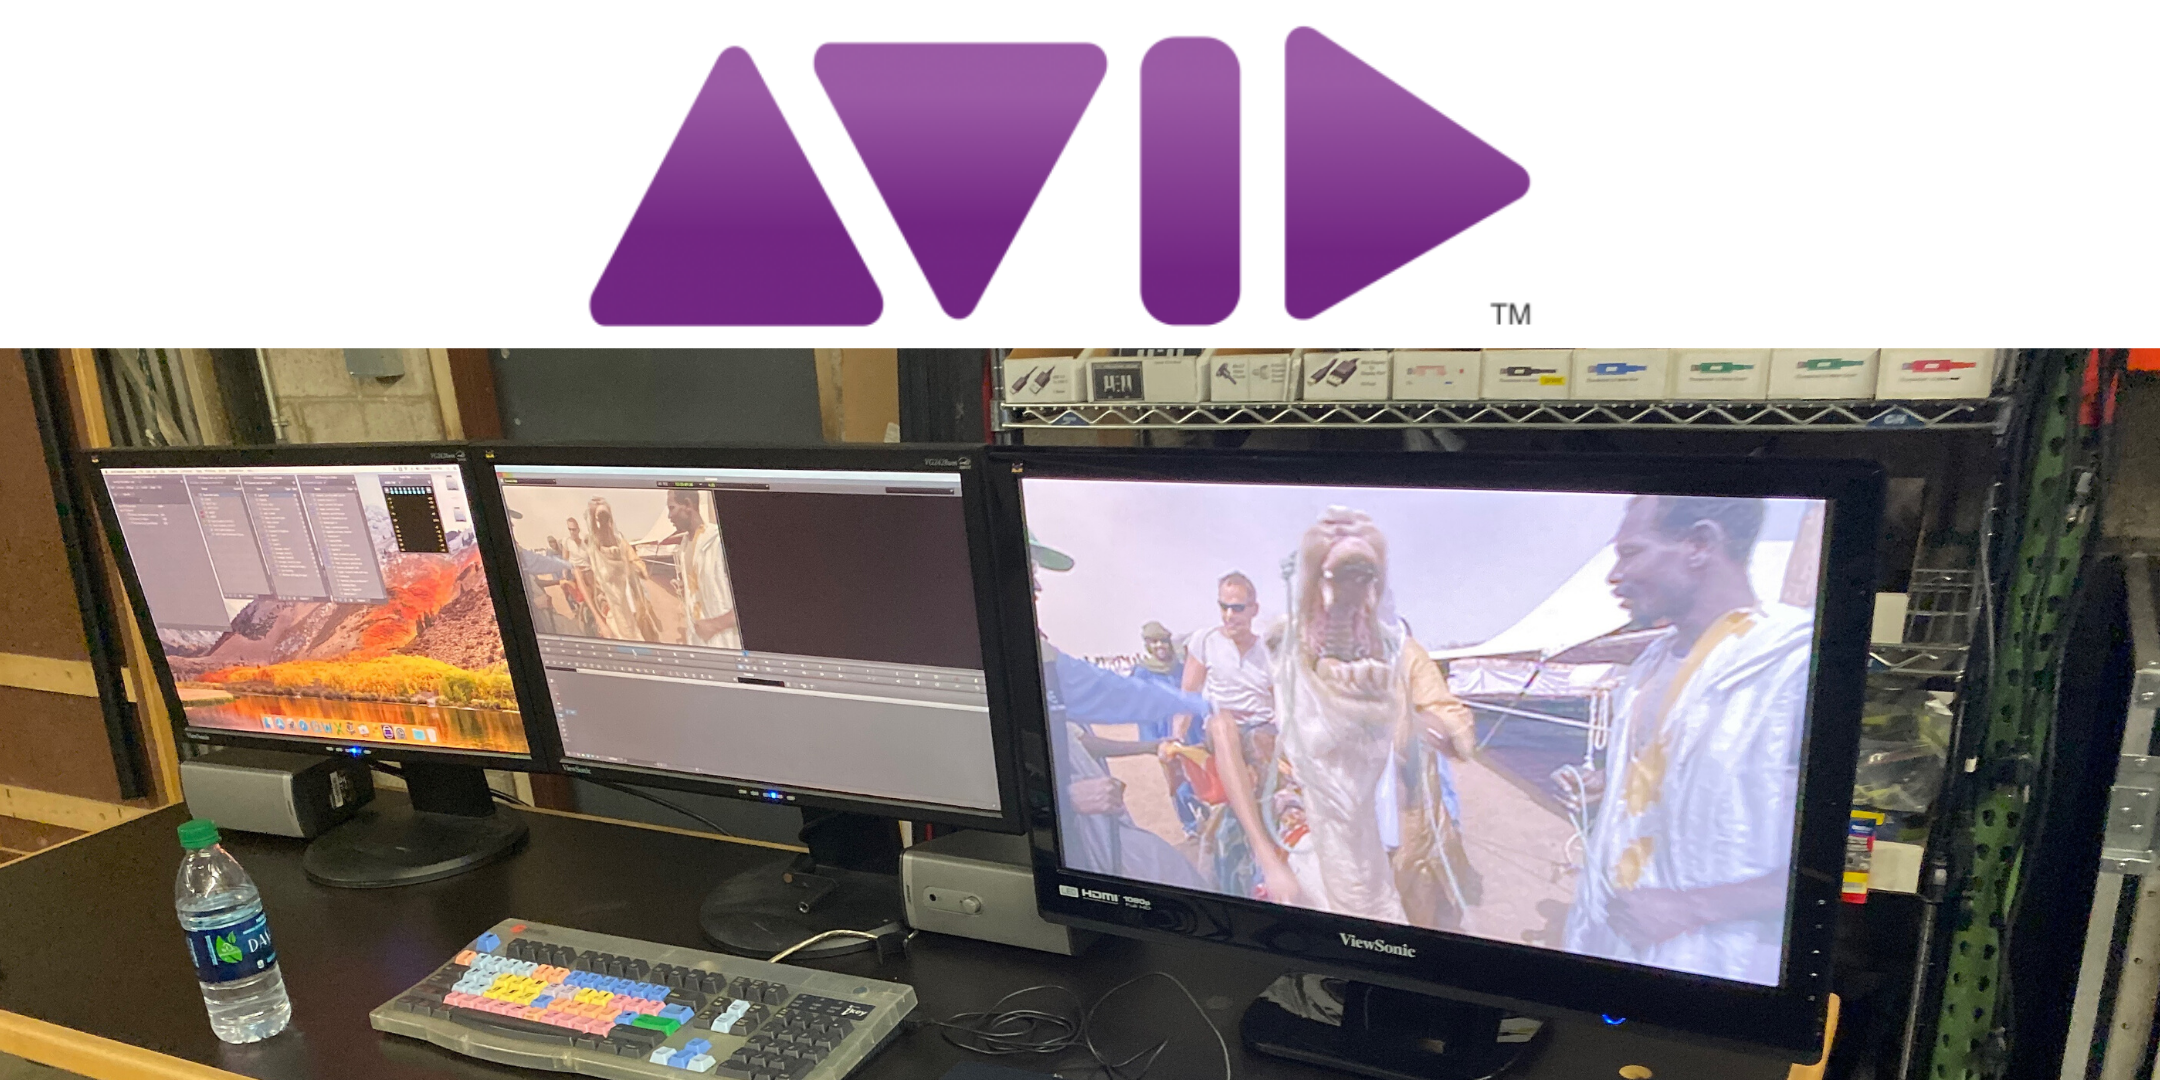 Introduction to Avid Media Composer with Stan Cassio